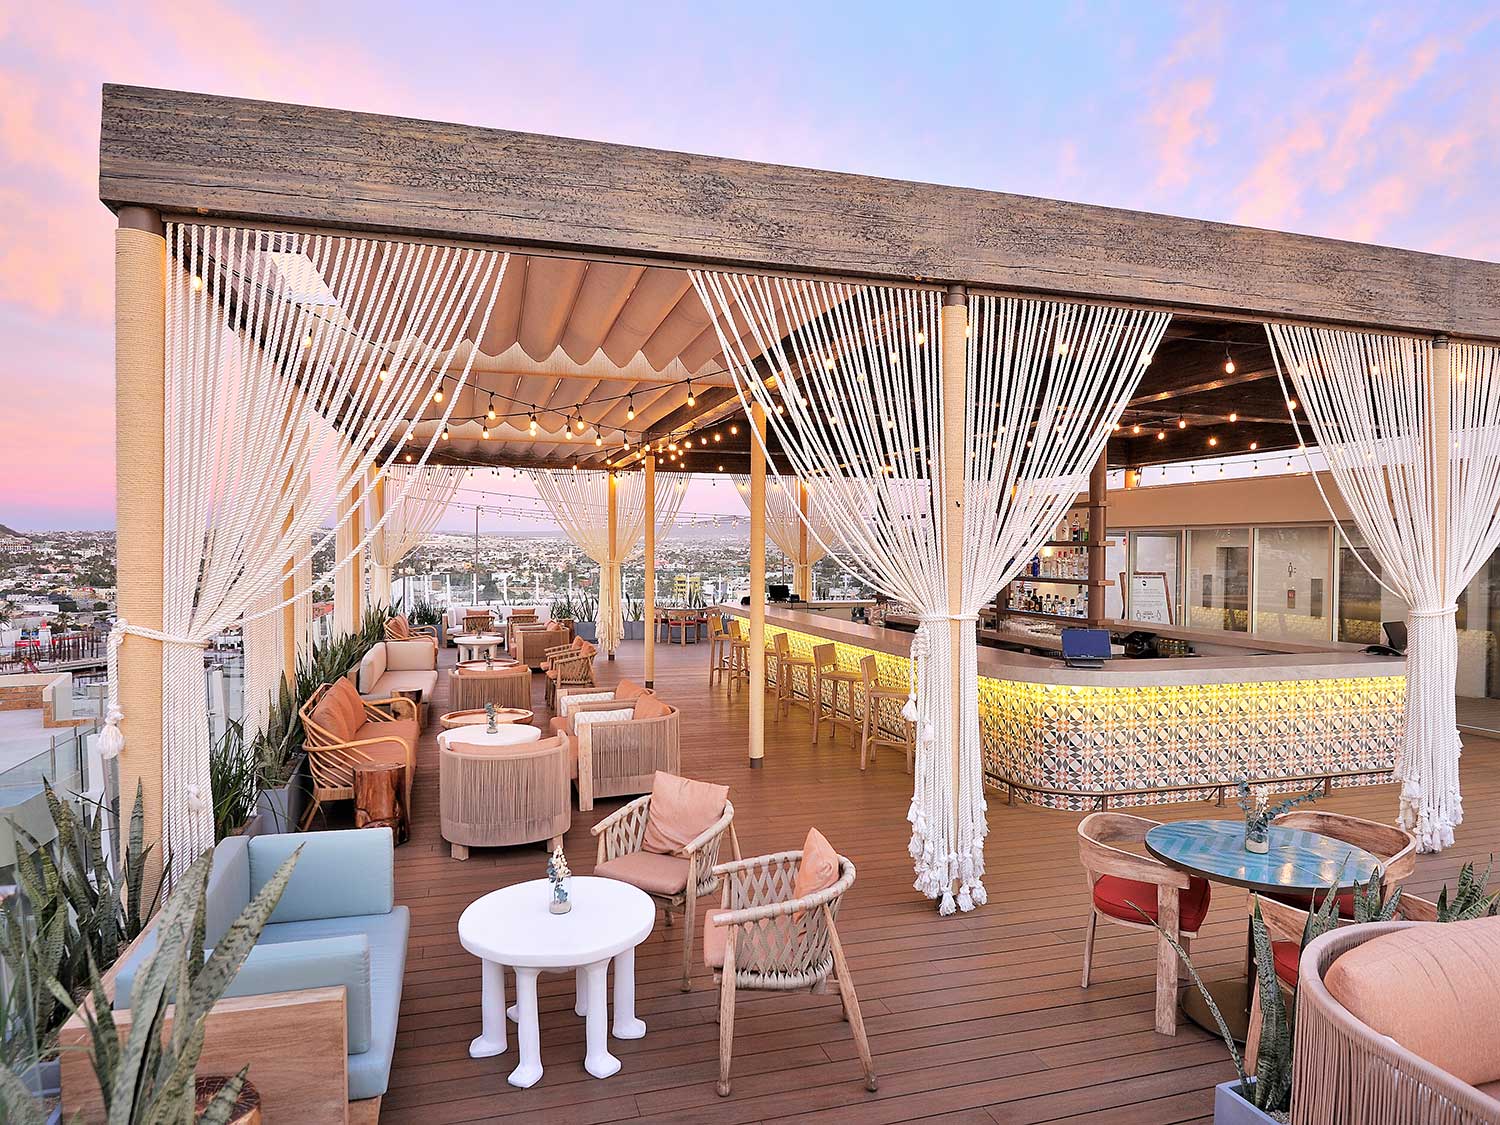 The rooftop bar at Corazon Cabo Resort & Spa offers spectacular 360-degree views of the region.